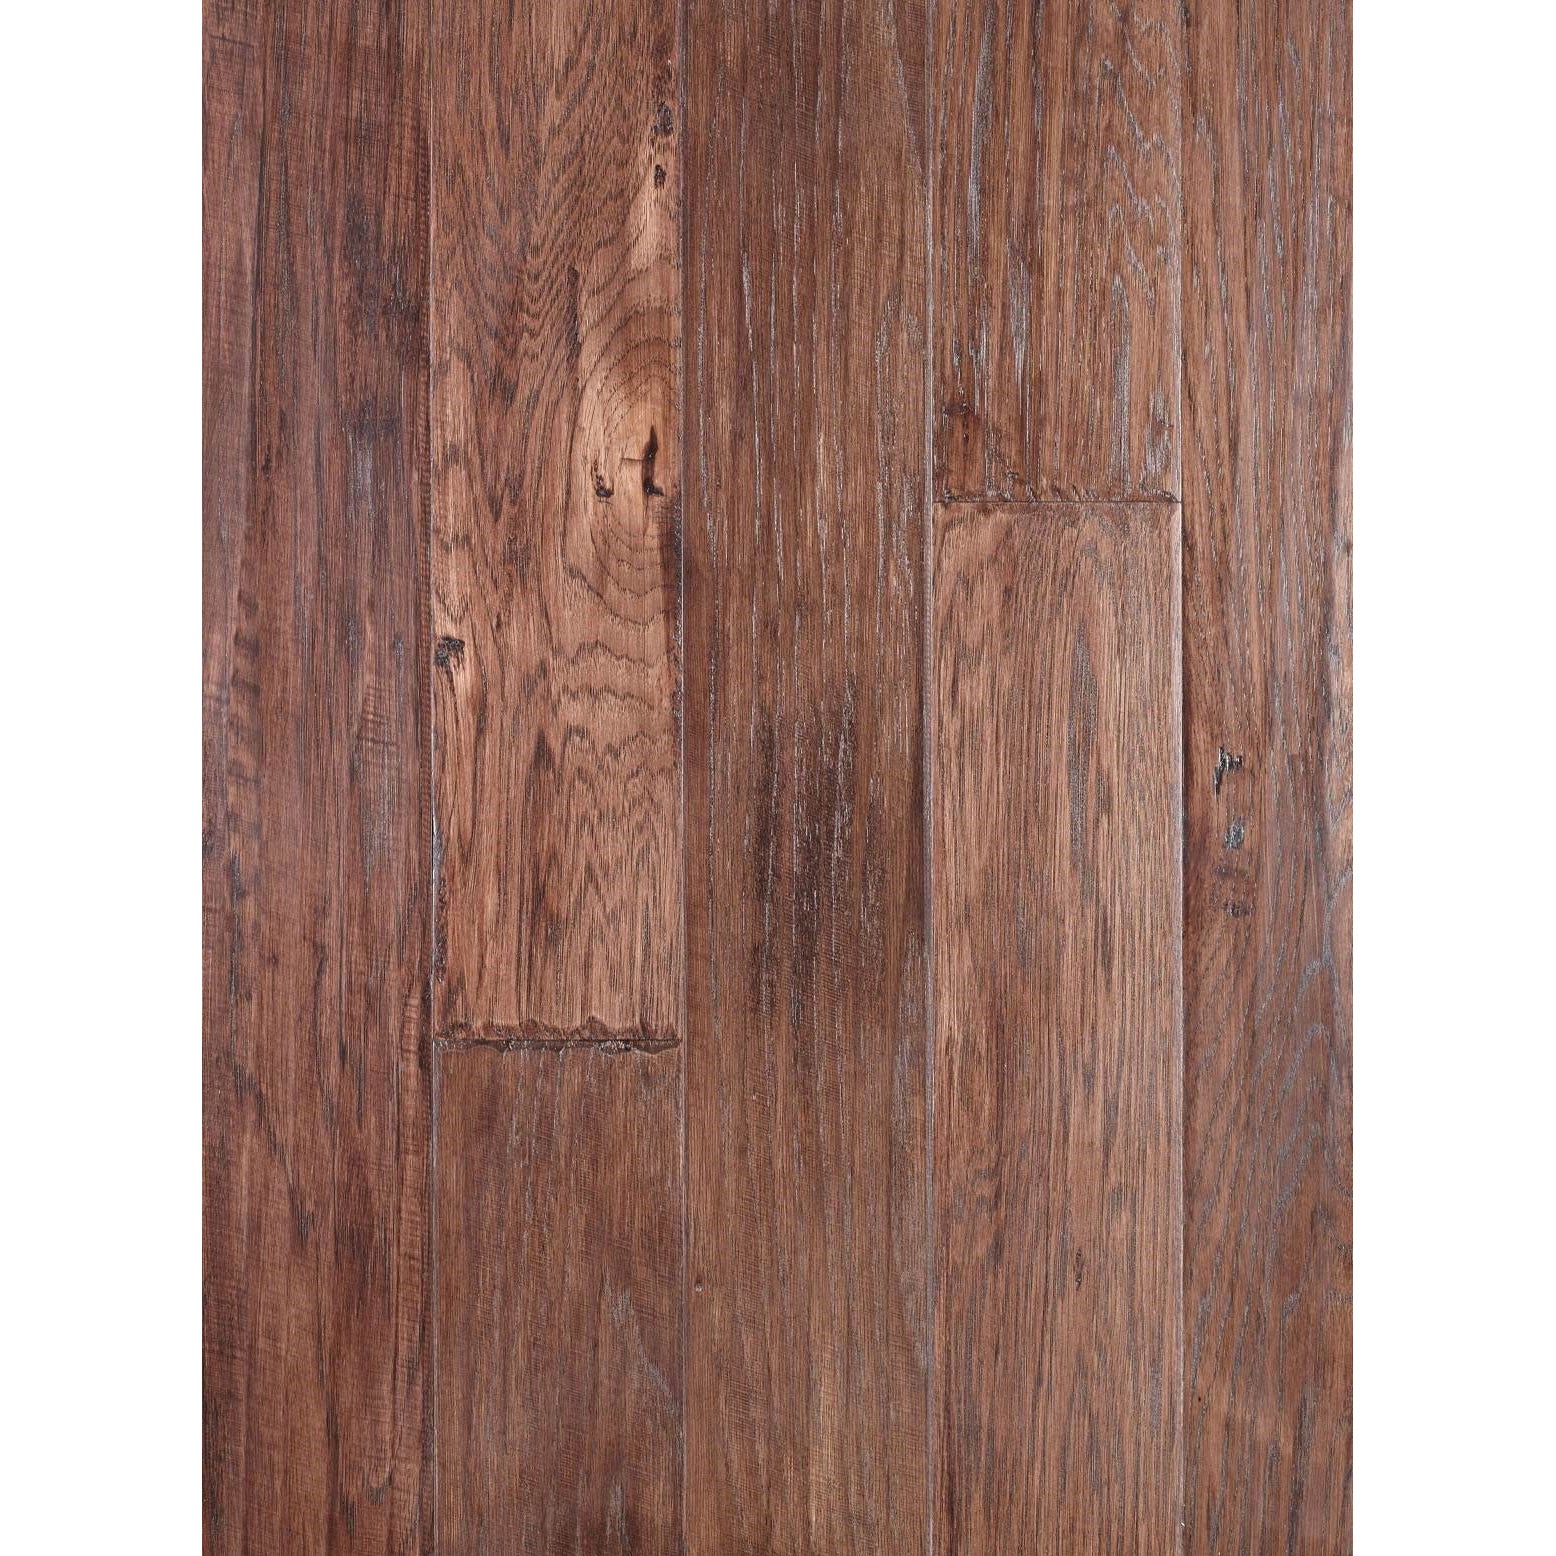 LM Flooring - River Ranch Collection - Tobacco Hickory